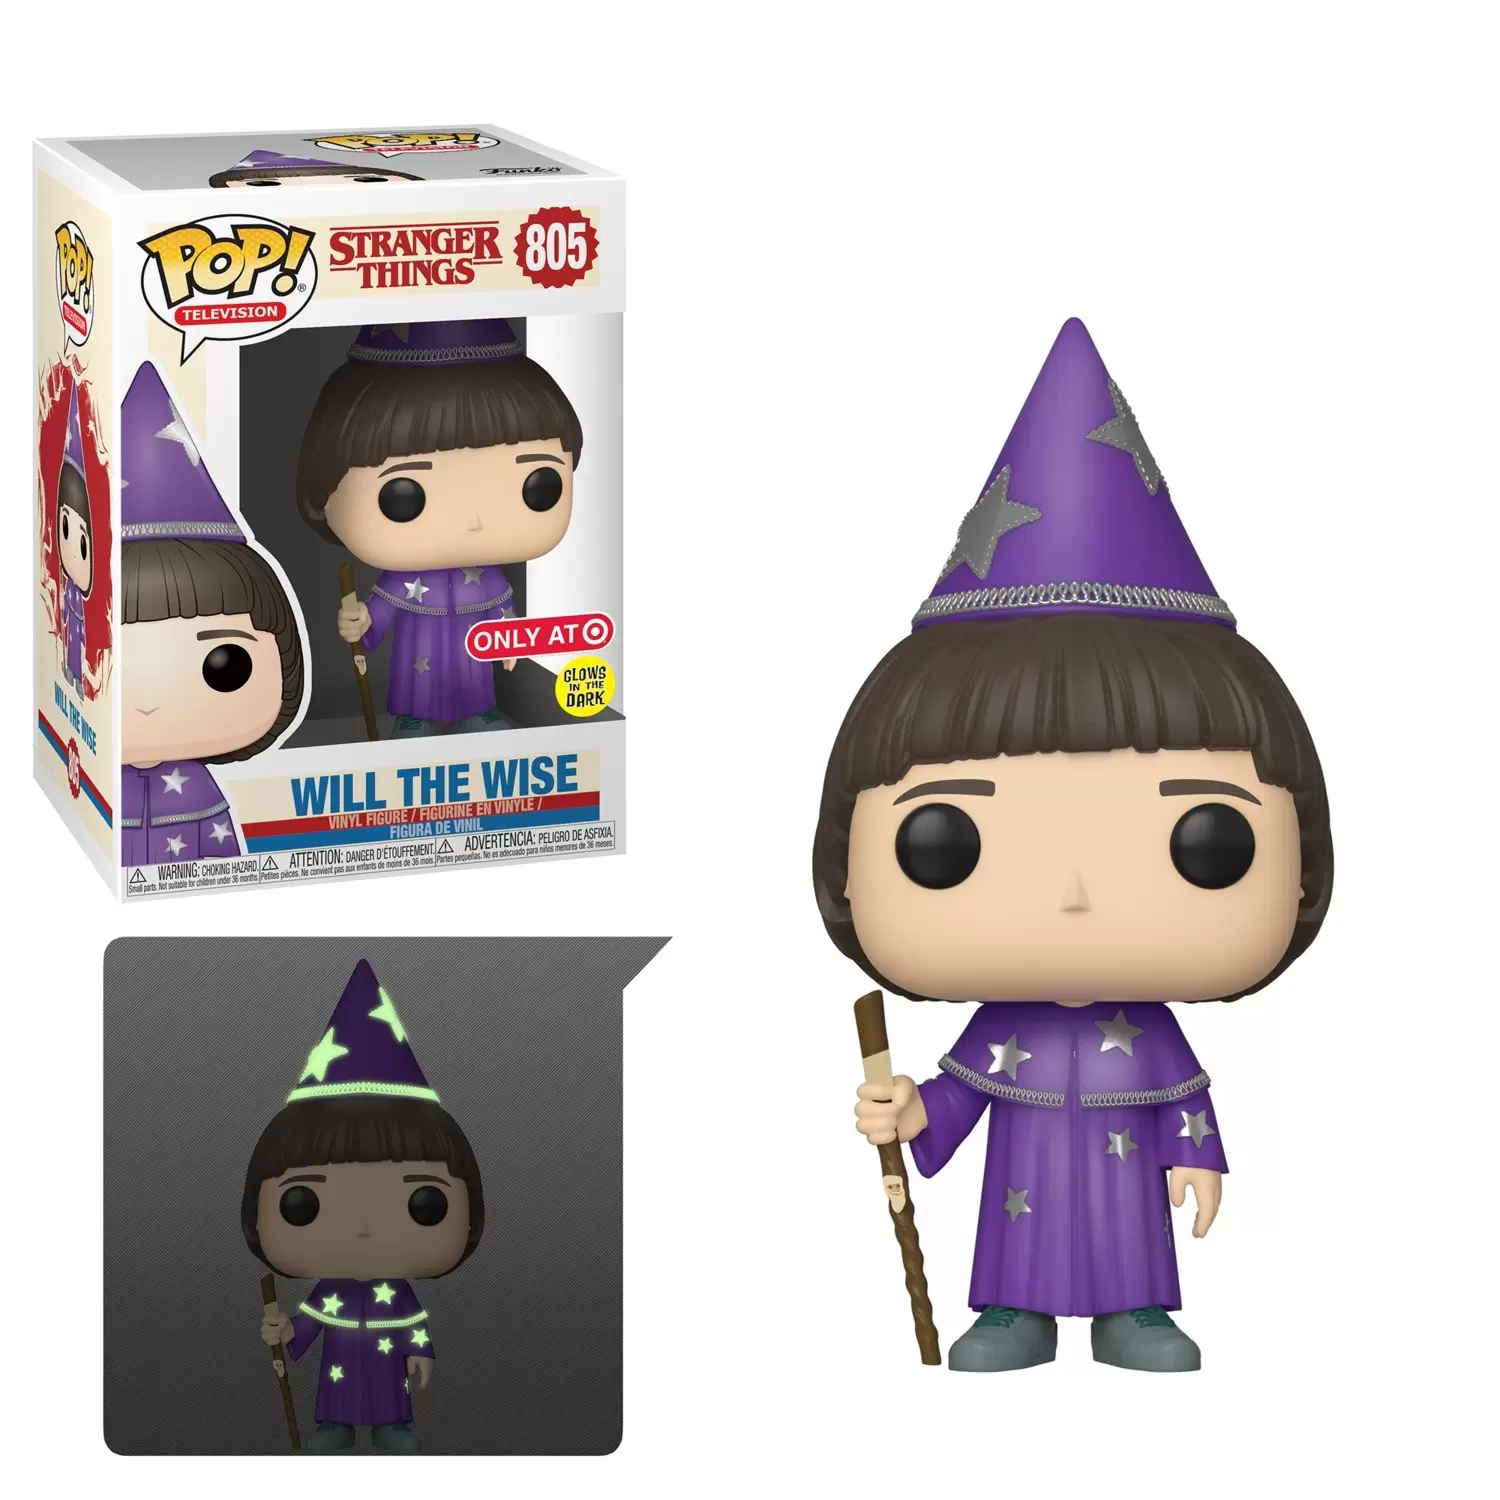 POP! Television - Stranger Things - Will The Wise GITD